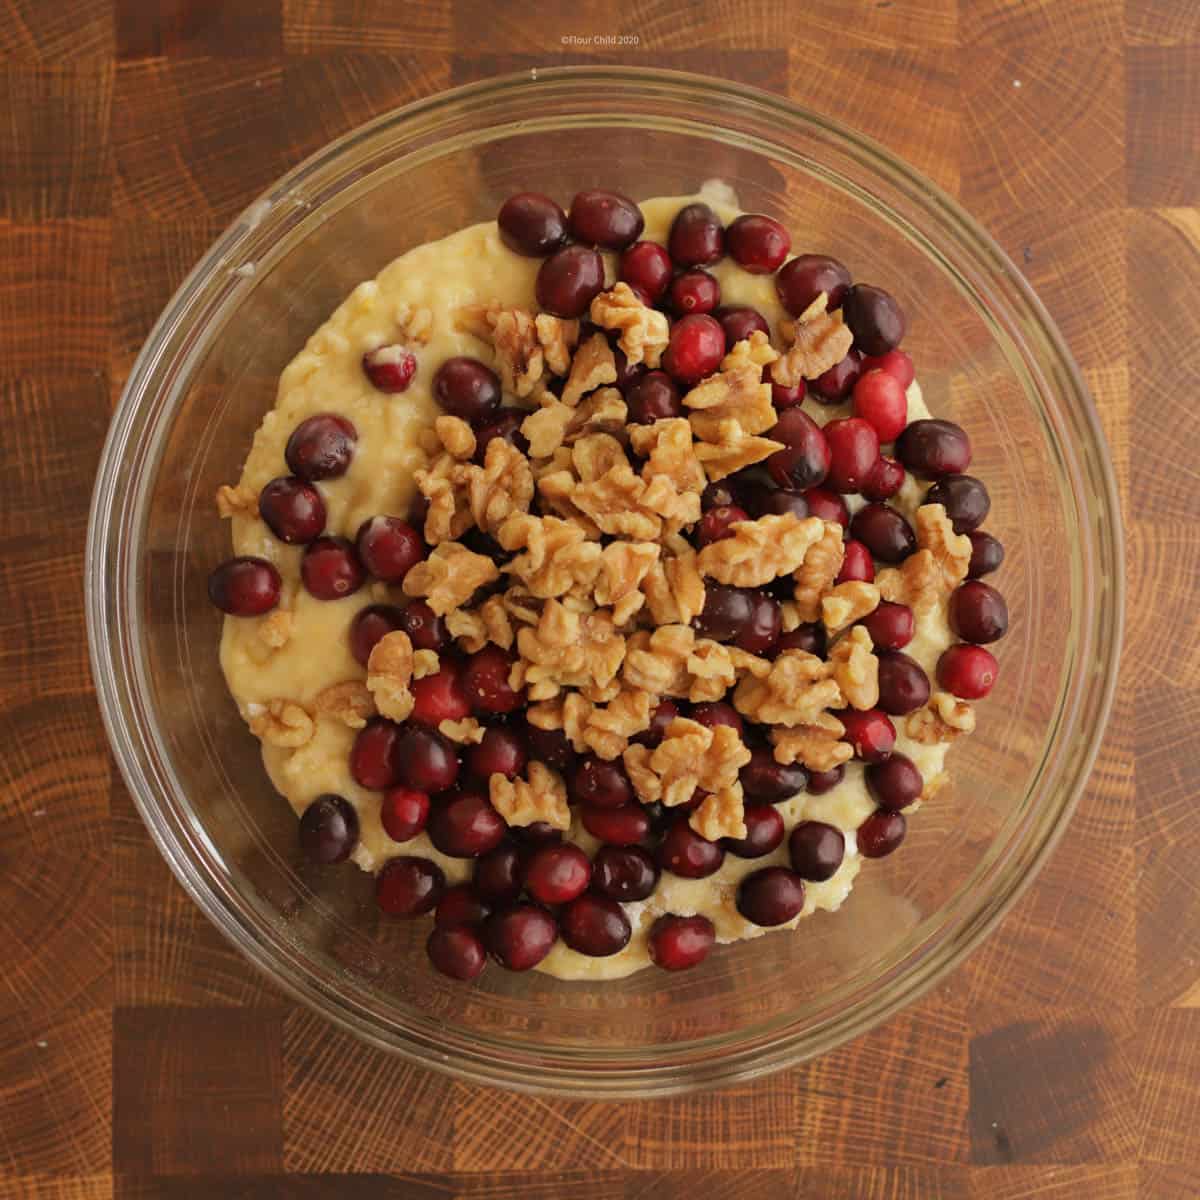 Mixing cranberries and optional nuts into the batter